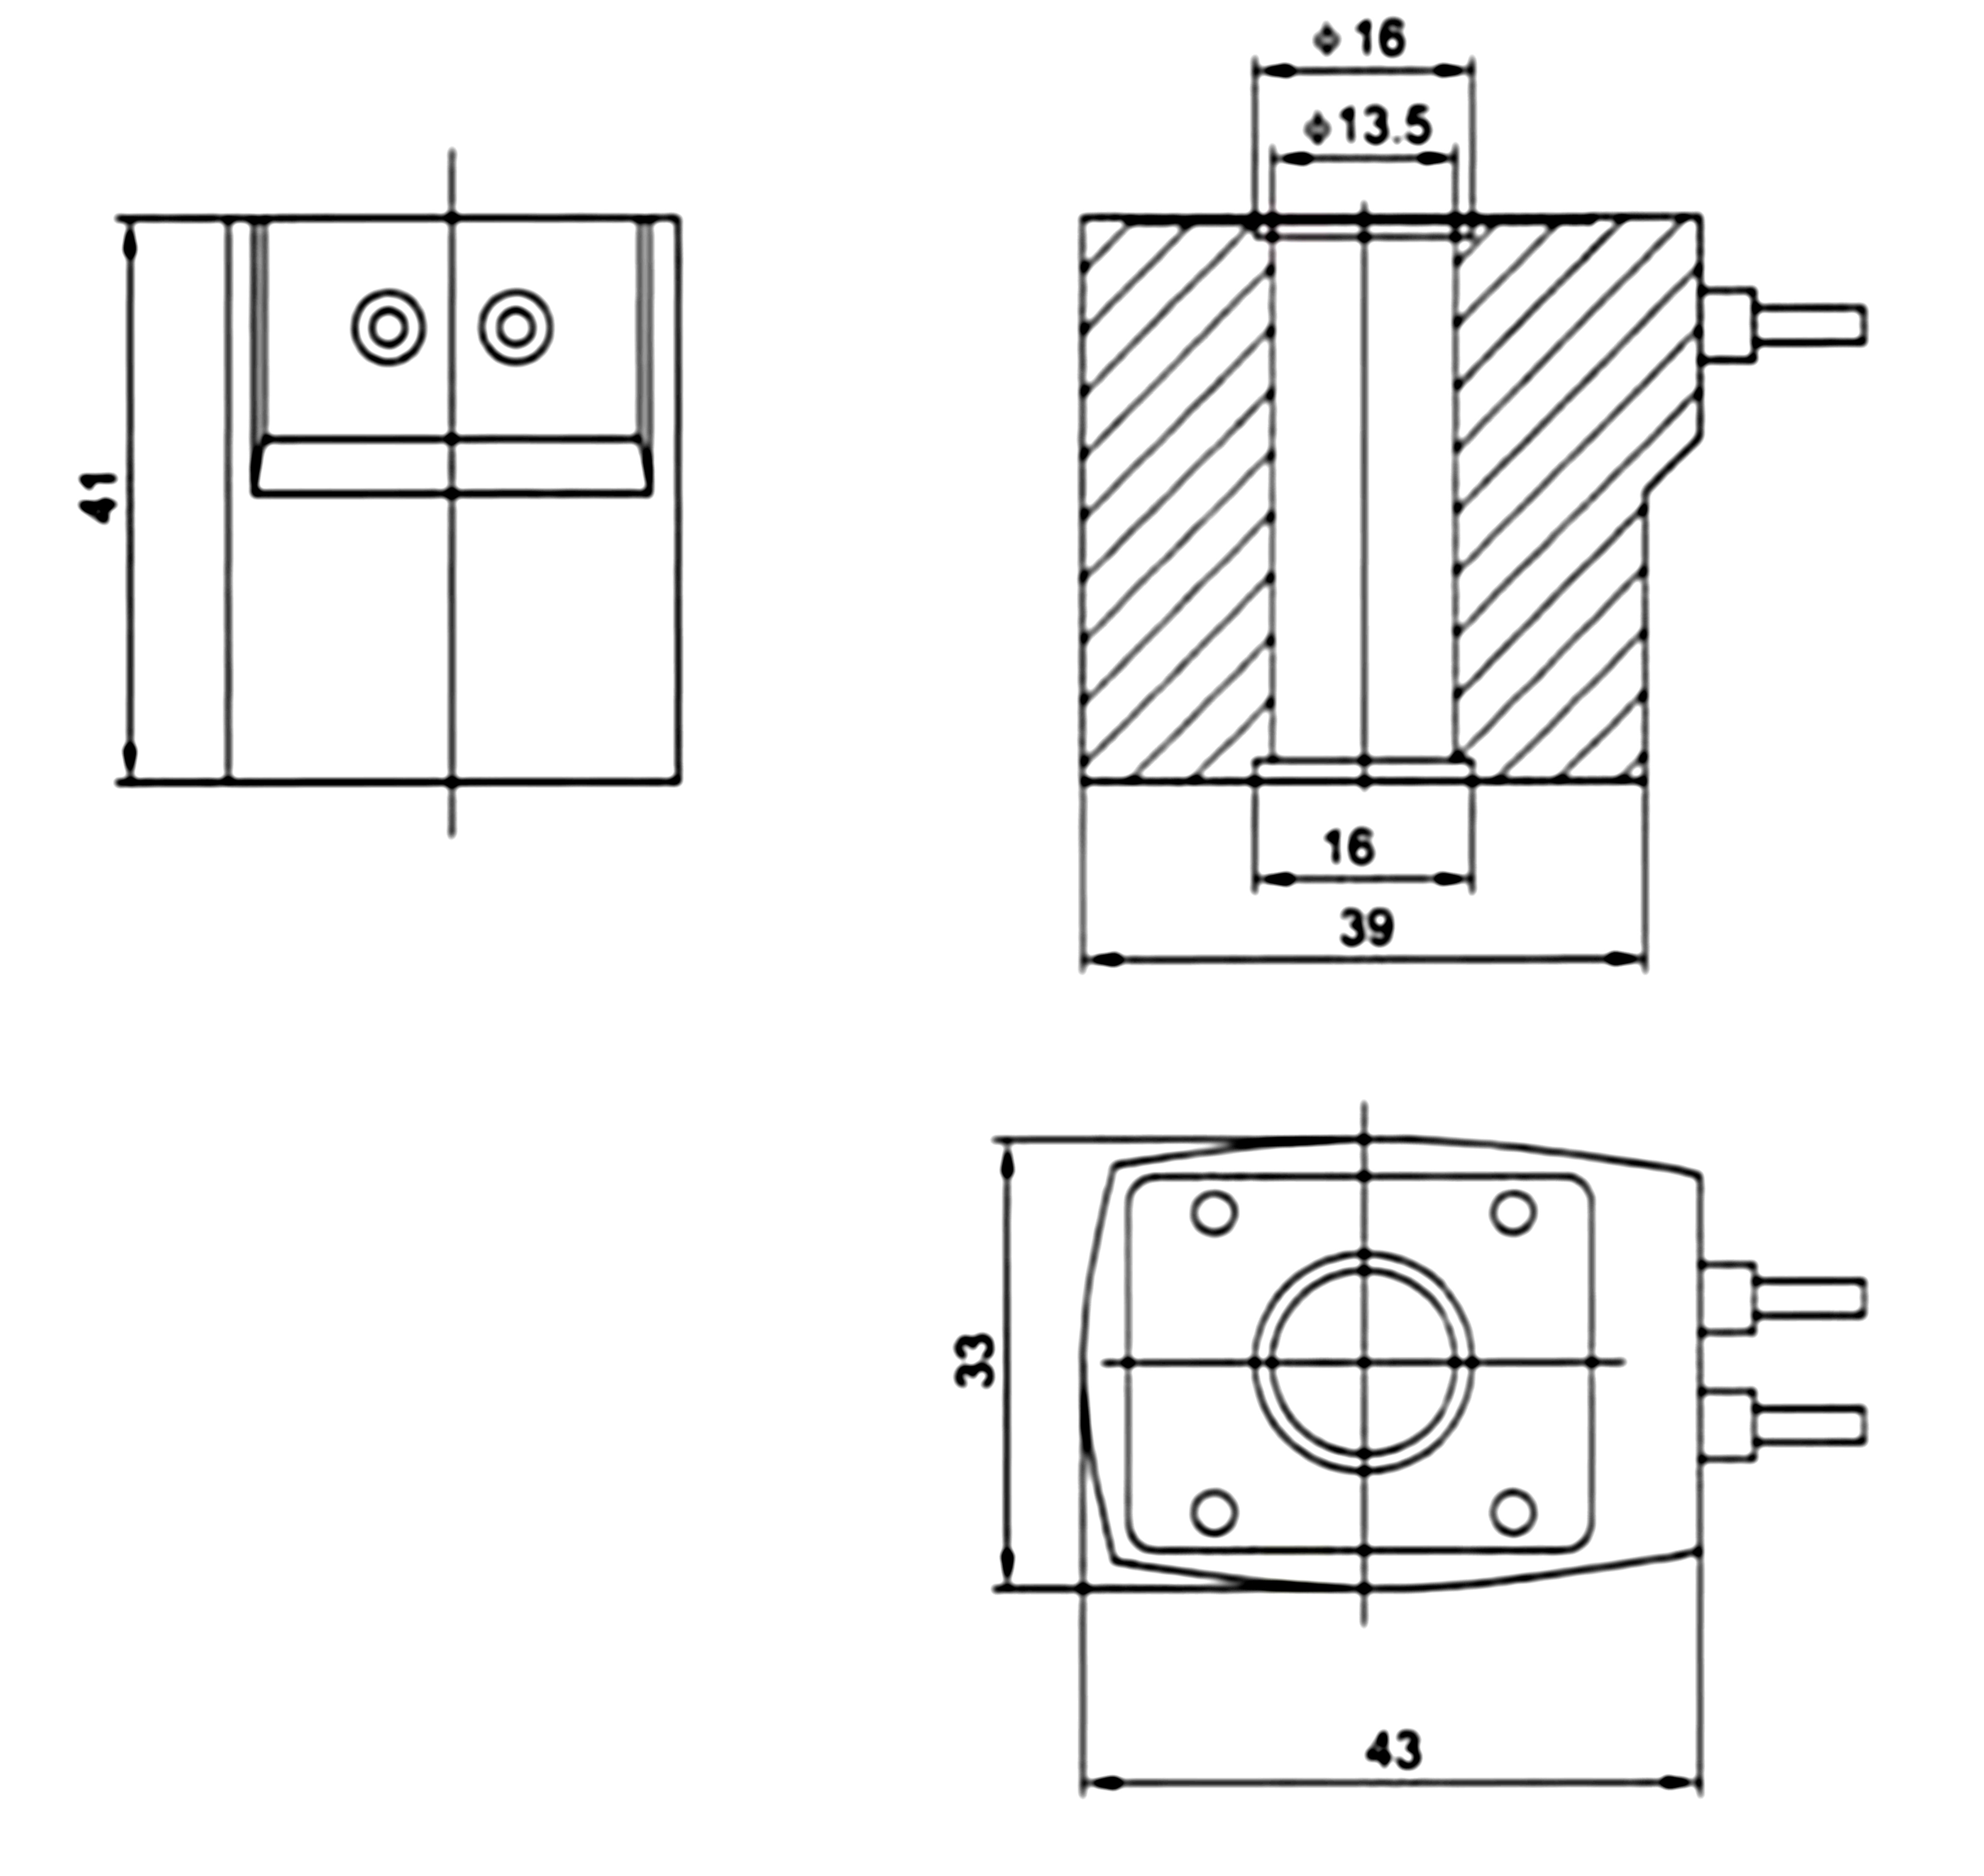 Dimension of BB13241001 Solenoid Coil: